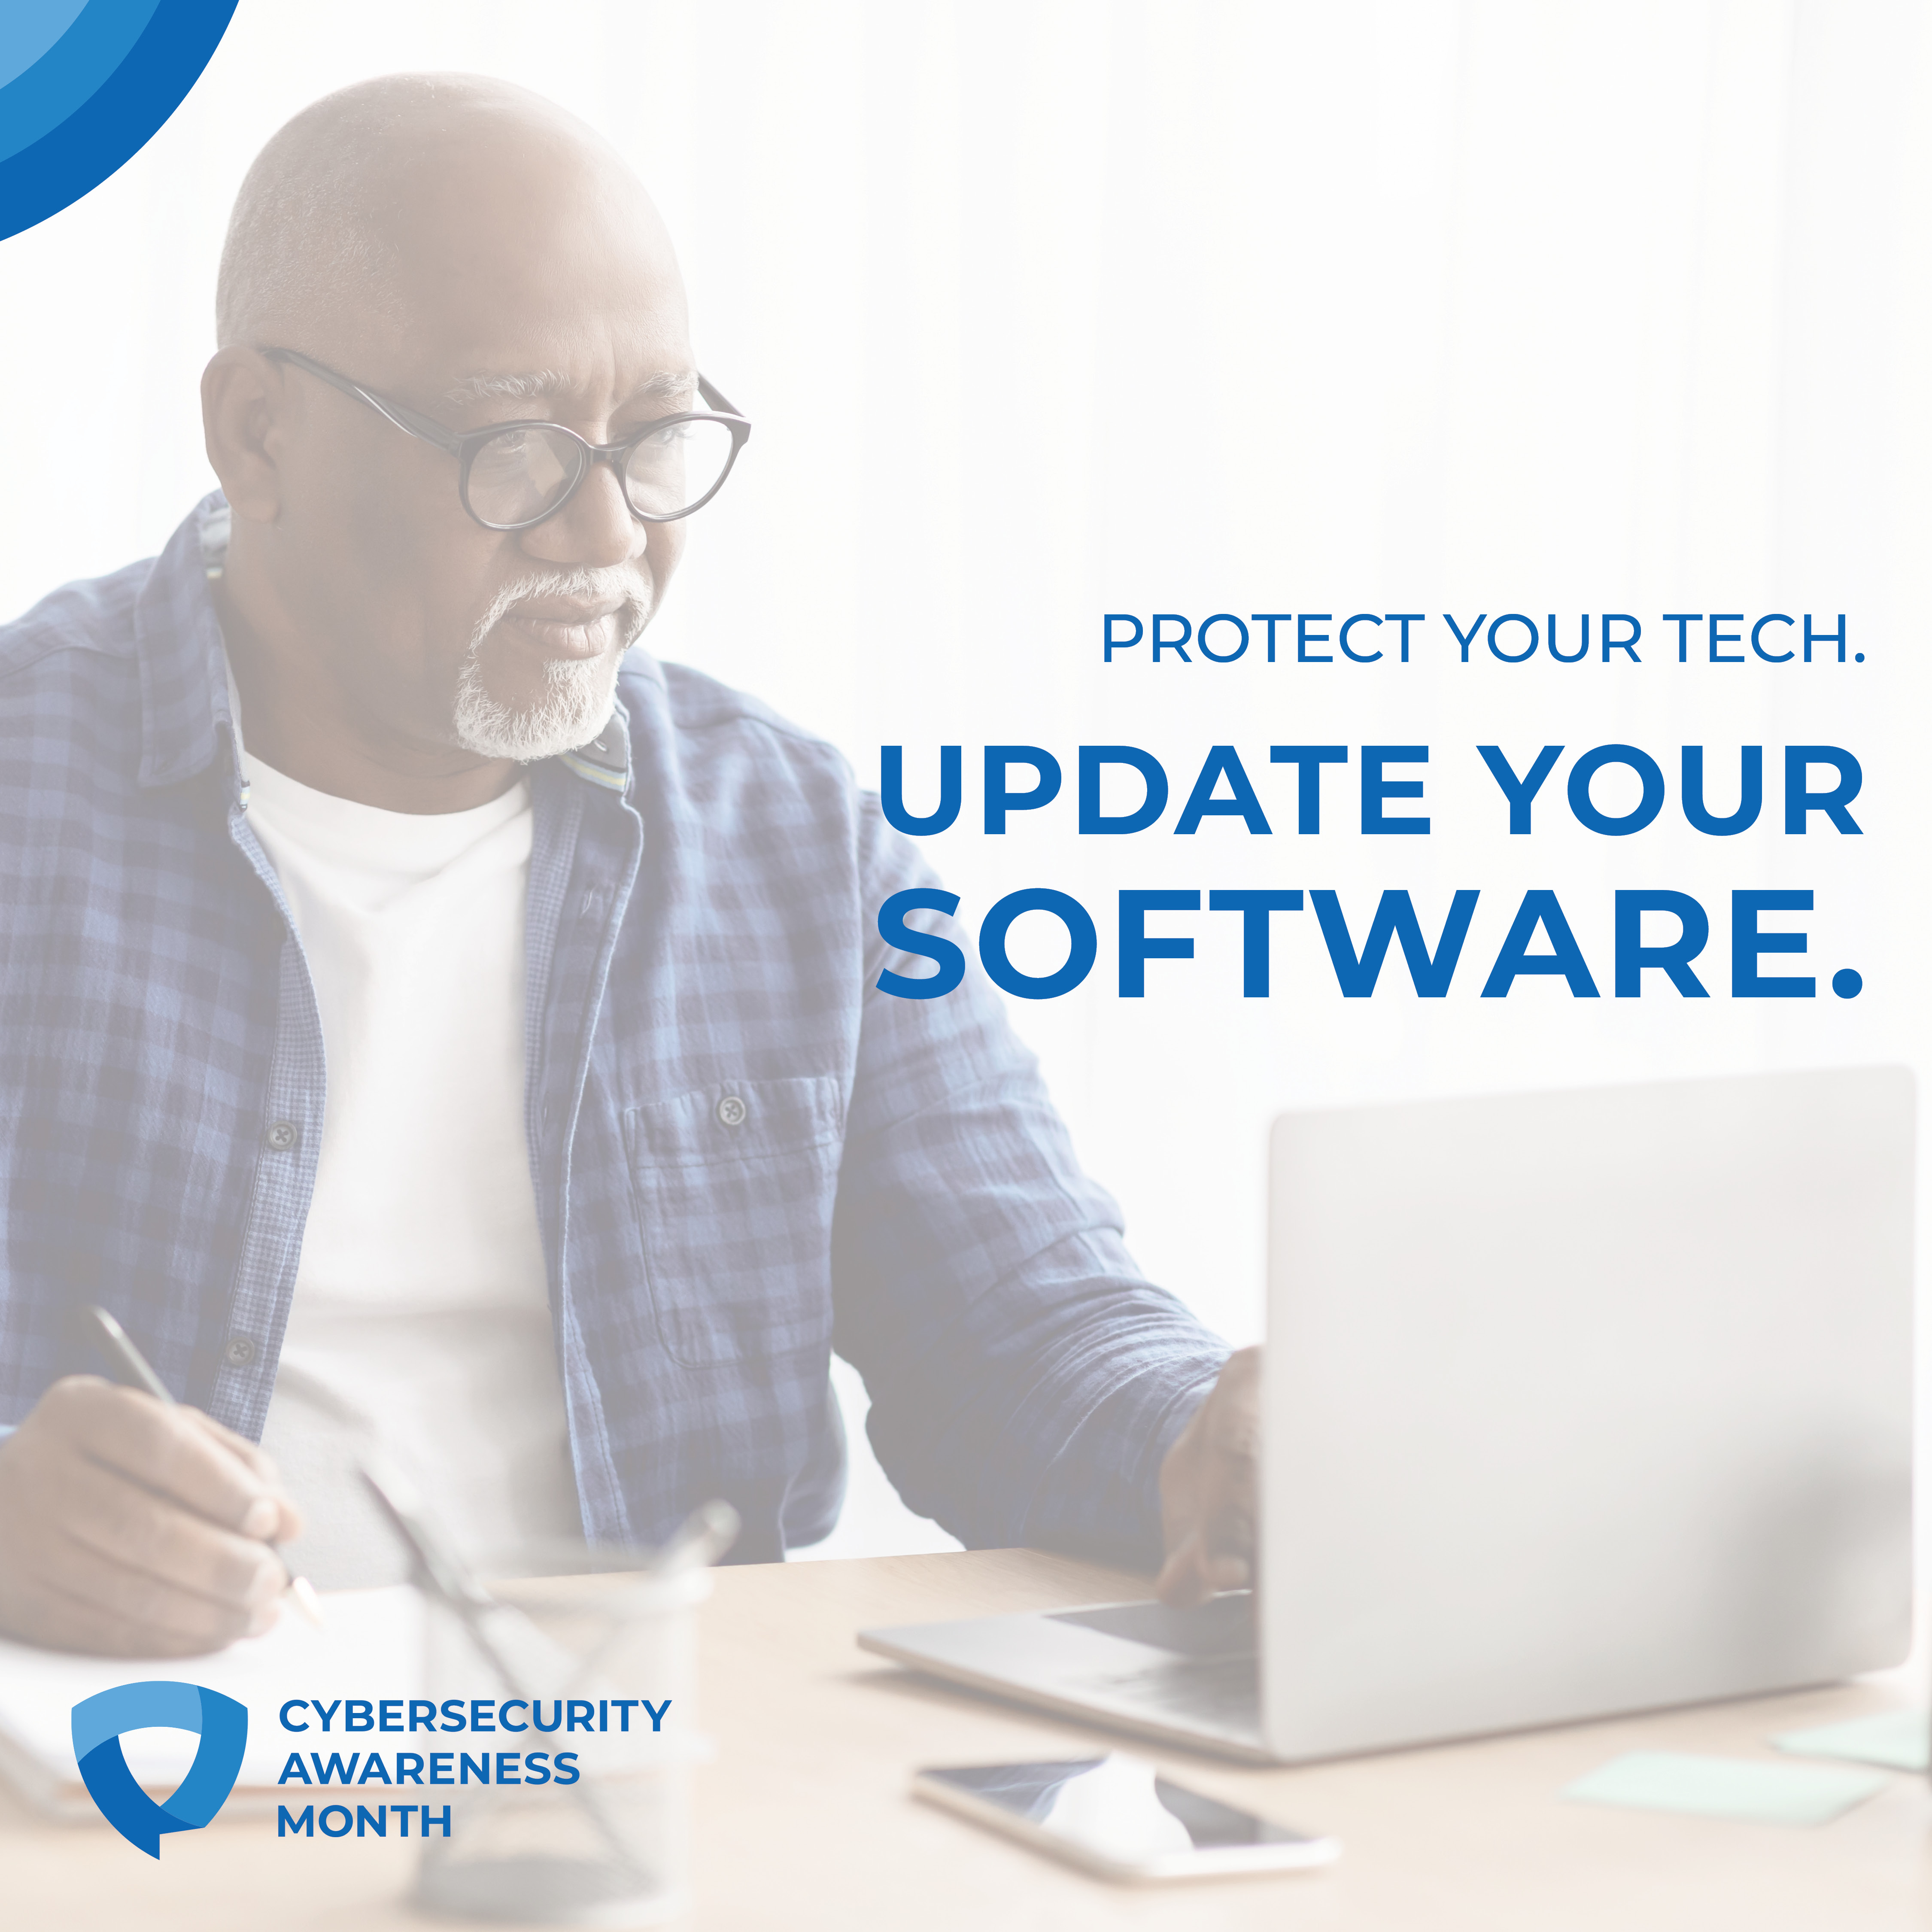 Protect your Tech, update your software